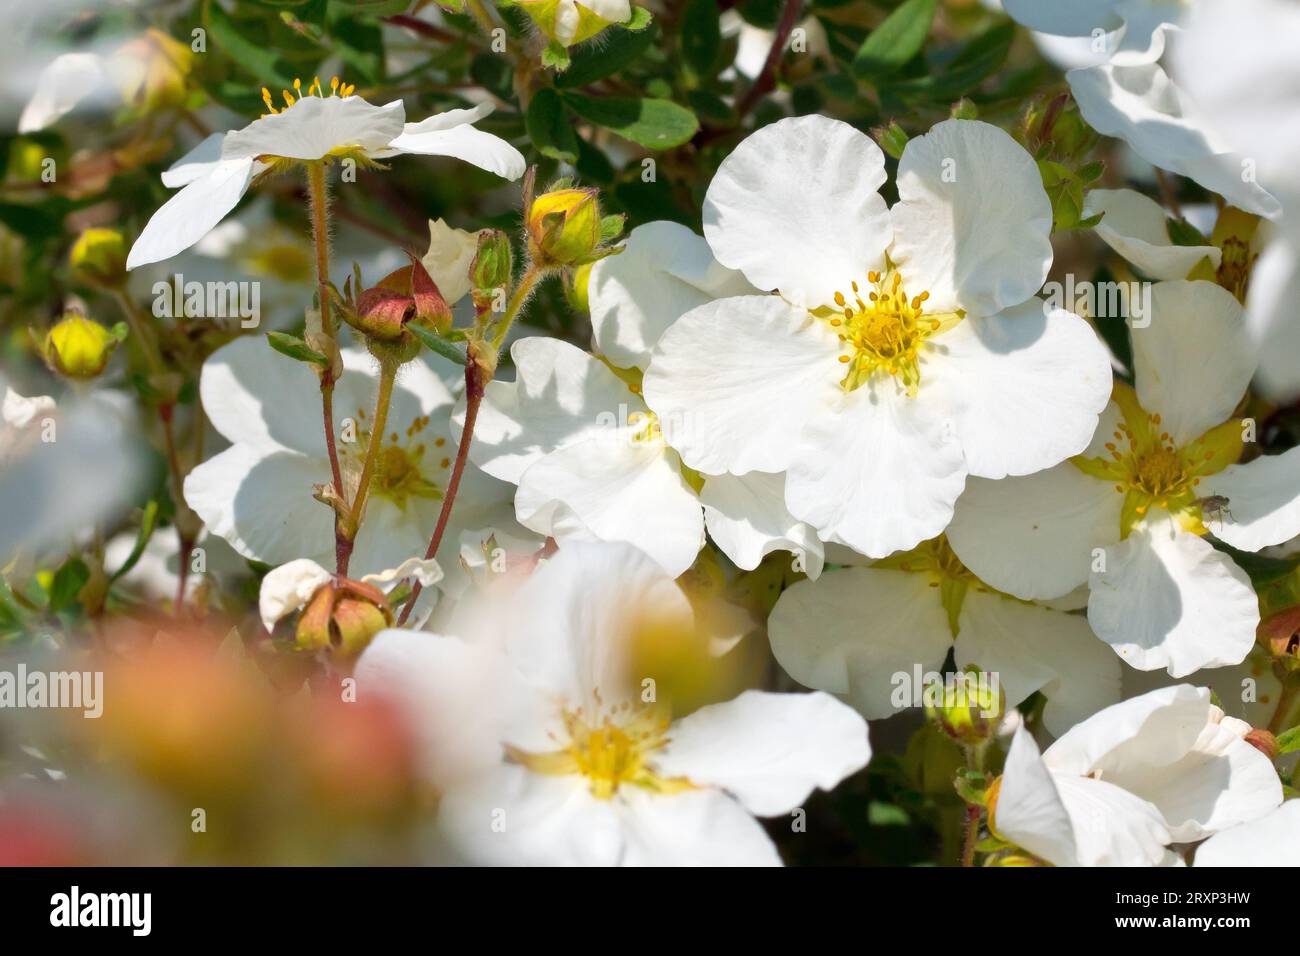 White Cinquefoil (potentilla alba), close up of the white flowers of the shrub commonly planted in gardens and public parks. Stock Photo